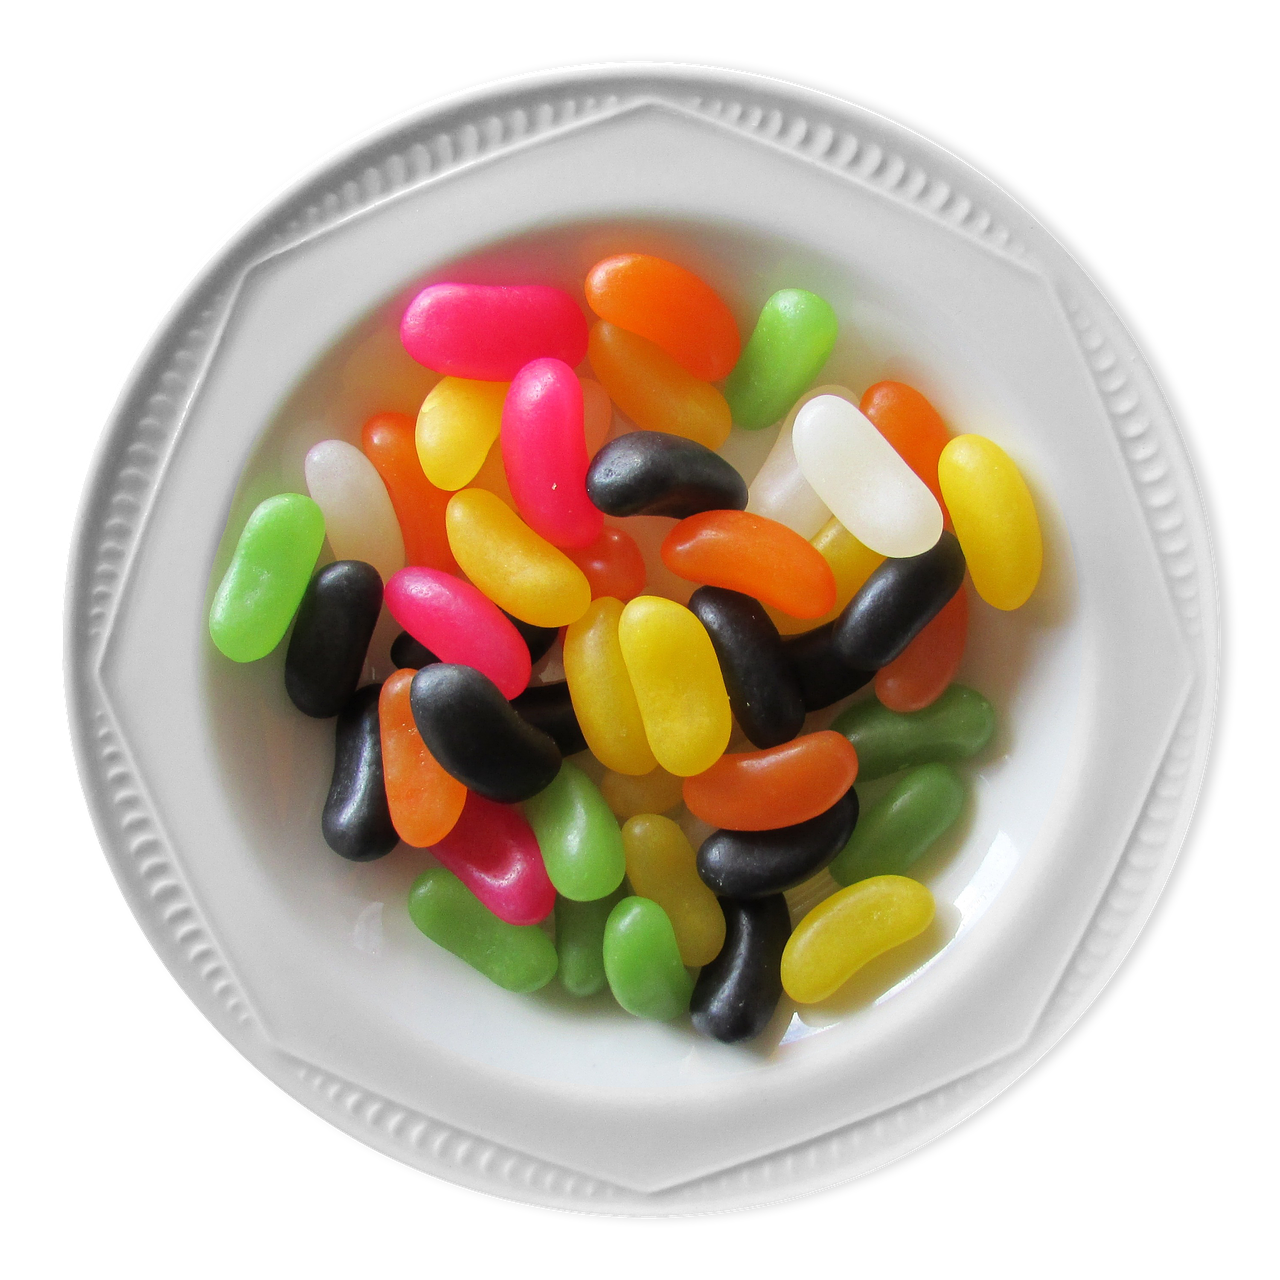 bowl of jelly beans  jelly beans  bowl free photo